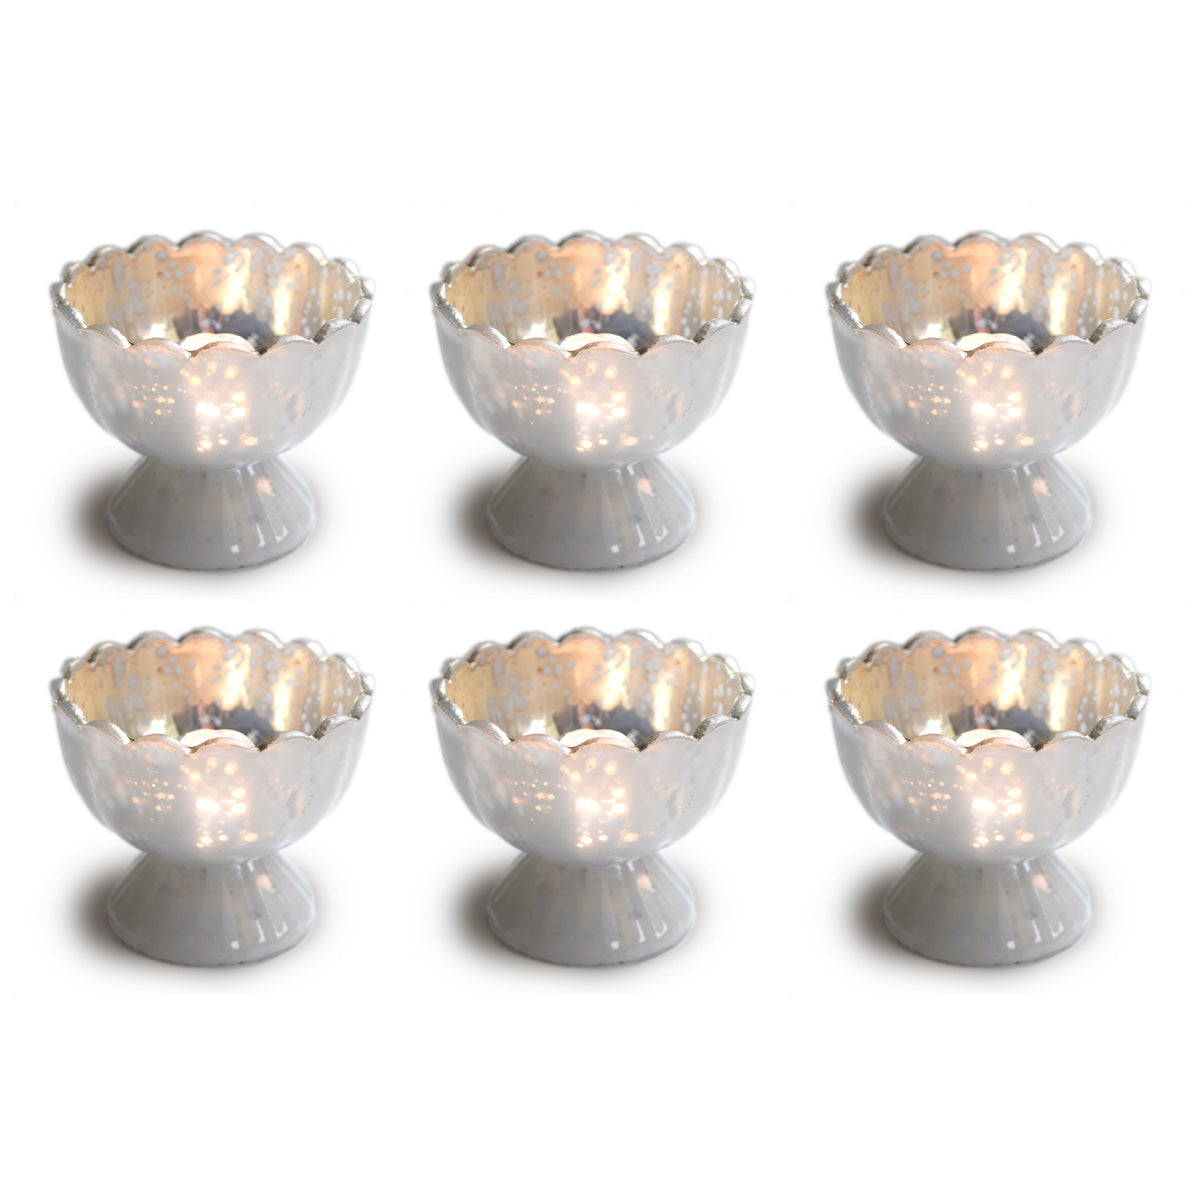 6 Pack | Vintage Mercury Glass Chalice Candle Holders (3-Inch, Suzanne Design, Sundae Cup Motif, Pearl White) - For Use with Tea Lights - For Home Decor, Parties and Wedding Decorations - Luna Bazaar | Boho &amp; Vintage Style Decor